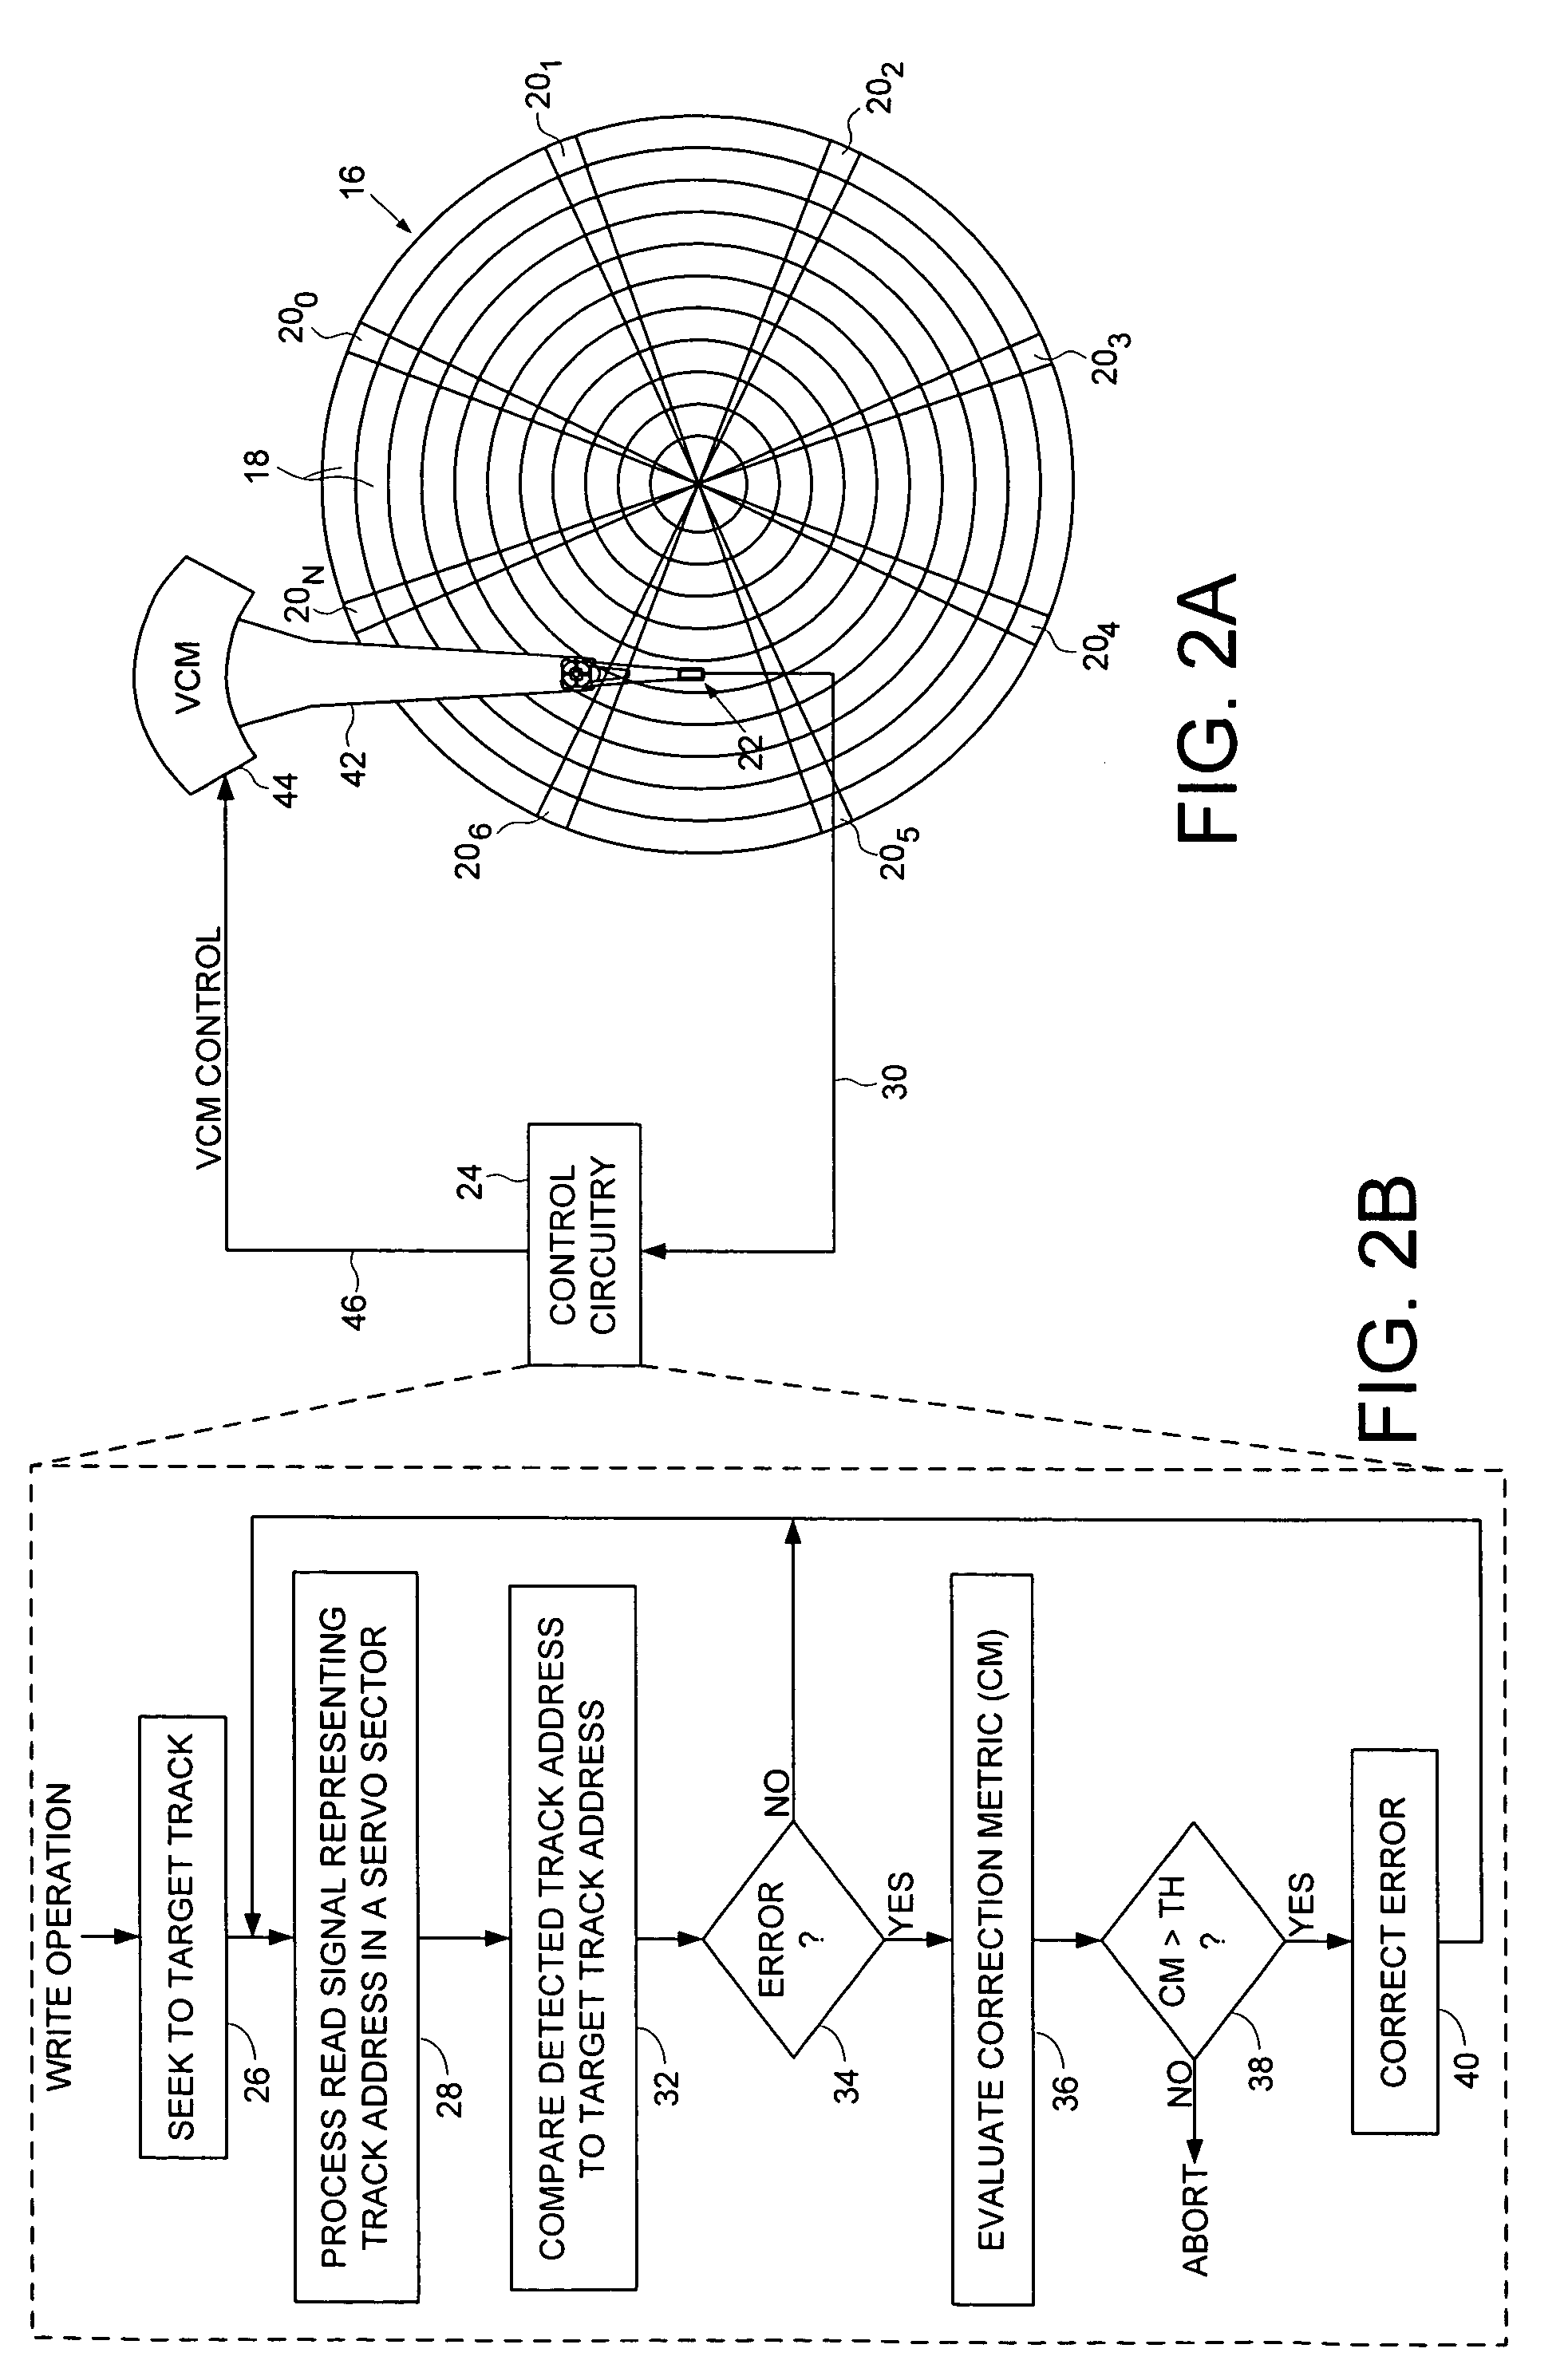 Disk drive correcting track address during a write operation